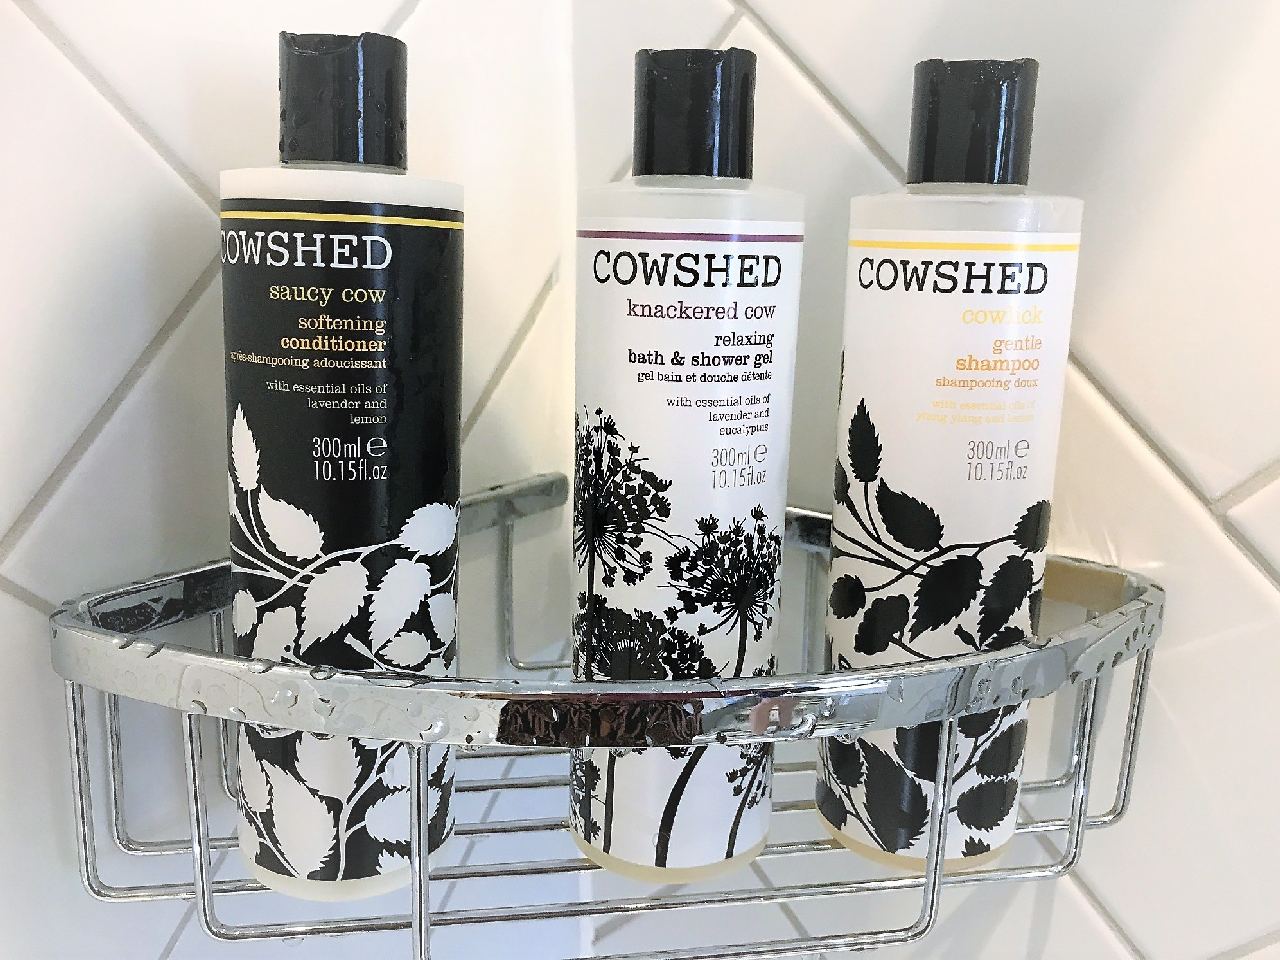 ull sized Cowshed toiletries at The Ginger Pig